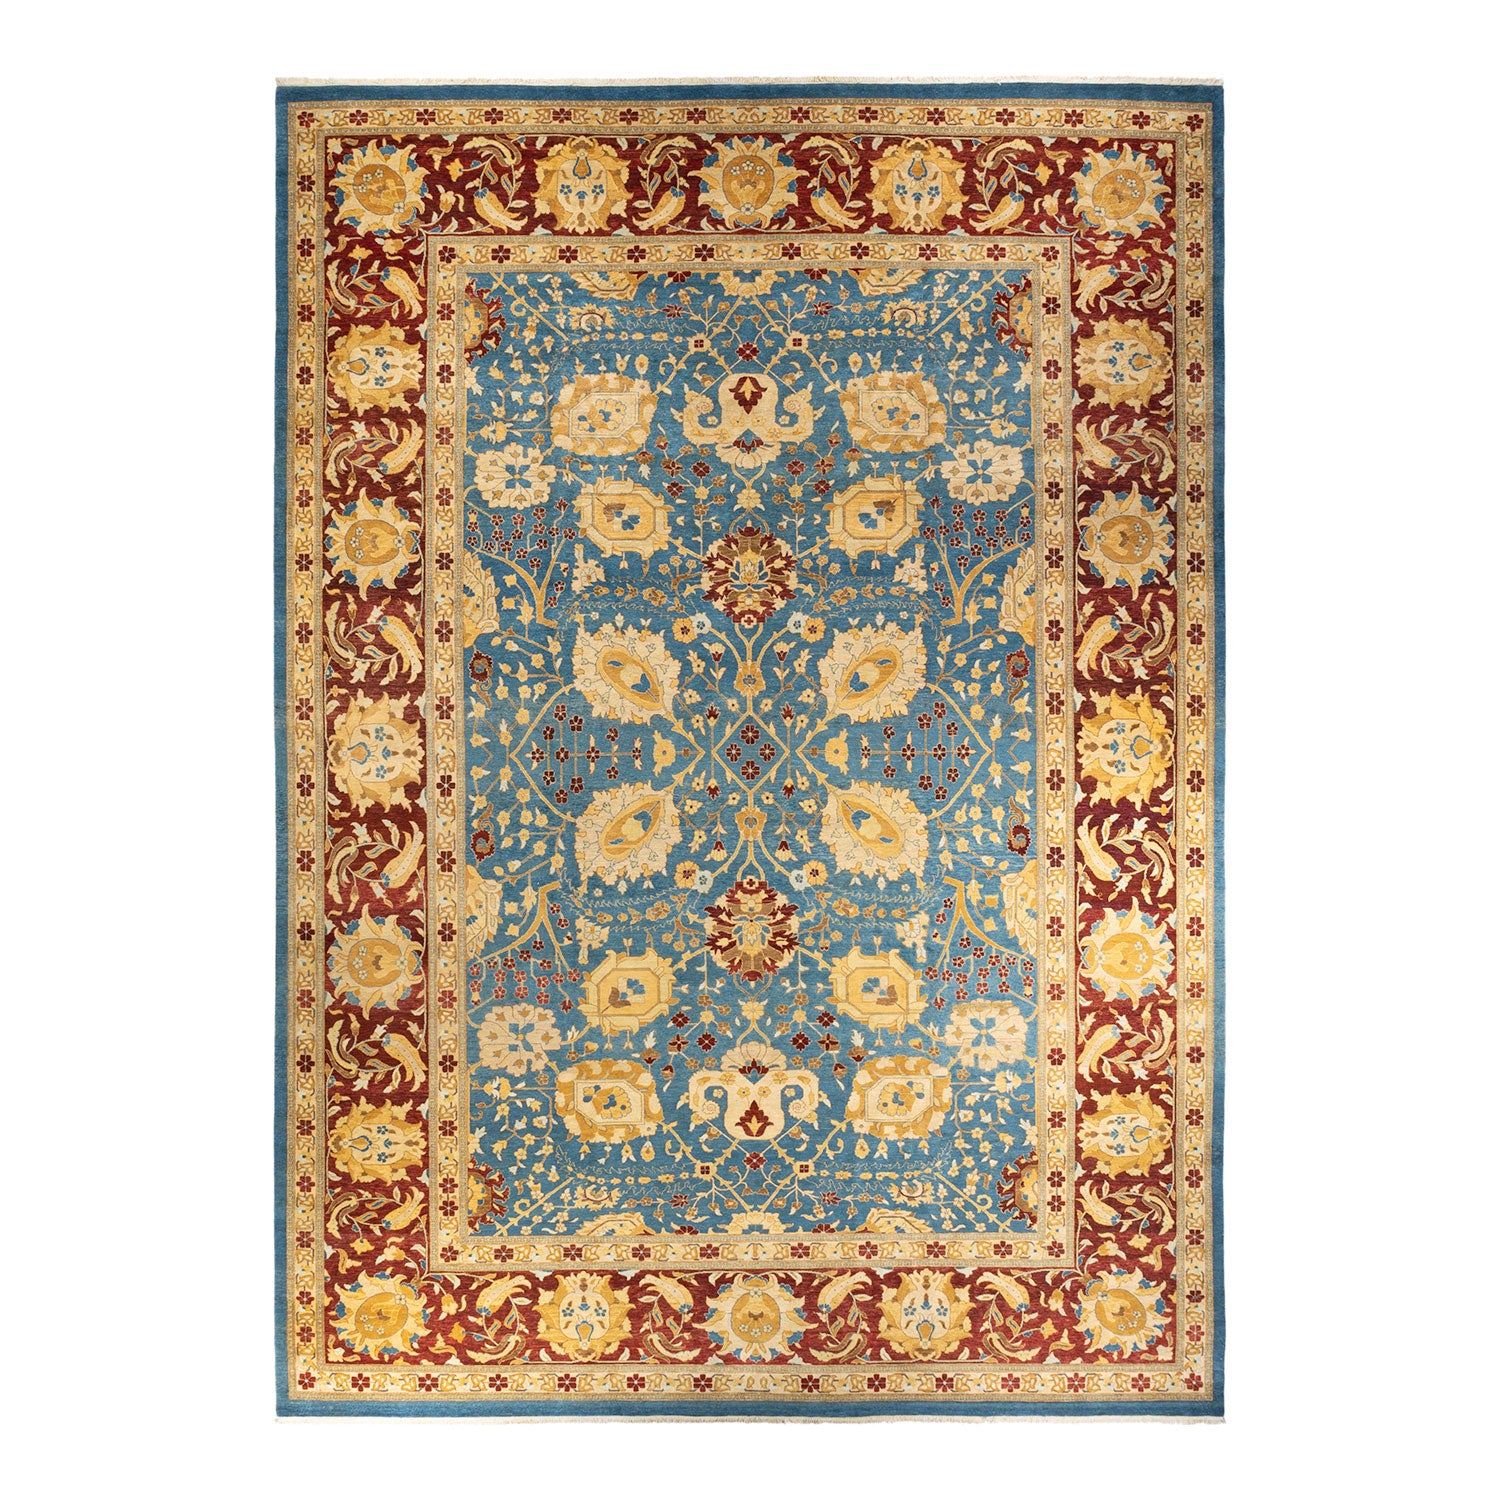 Intricate Persian-inspired rug with floral and geometric motifs in blue